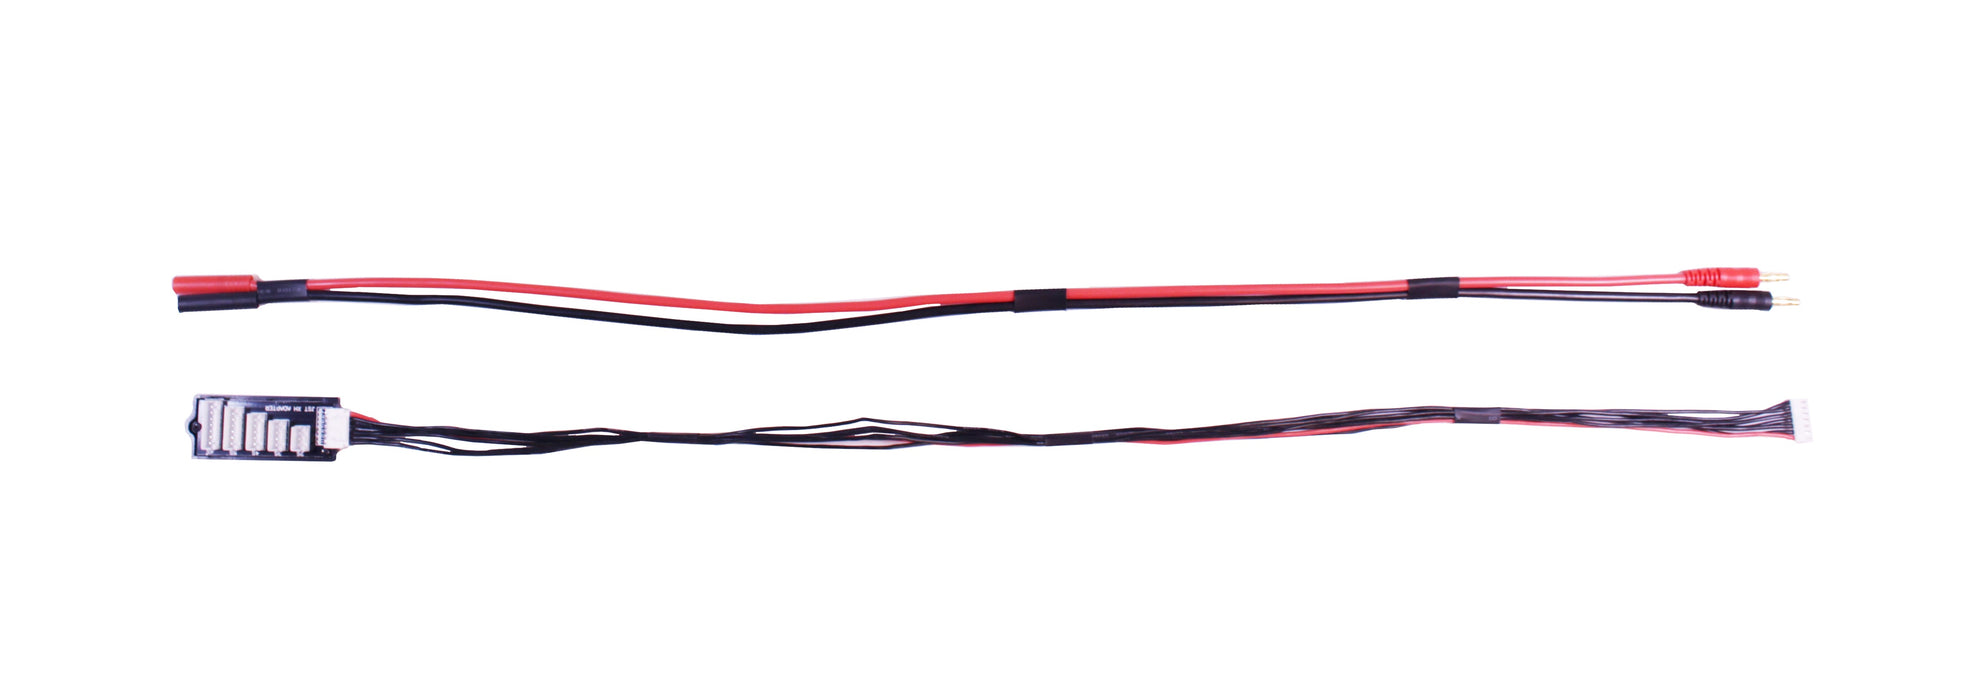 1615 - 24" Charge / Balance Lead Extension Kit - Use with LiPo Safes and Bags